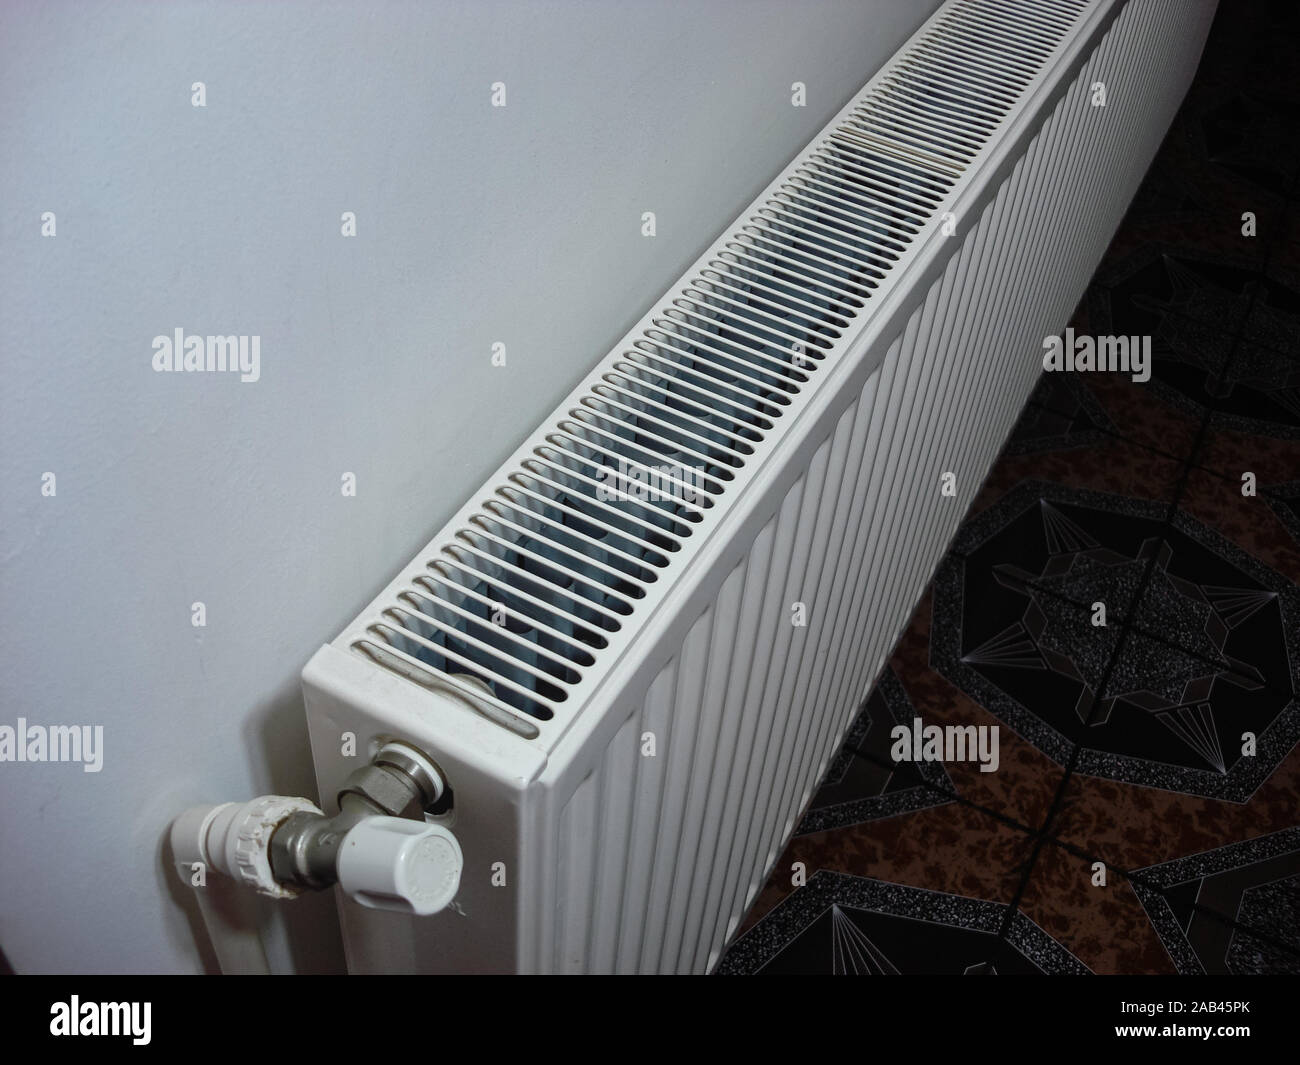 White metal heating radiator mounted on a wall in room interior.  Bucharest, Romania, 2019. Stock Photo